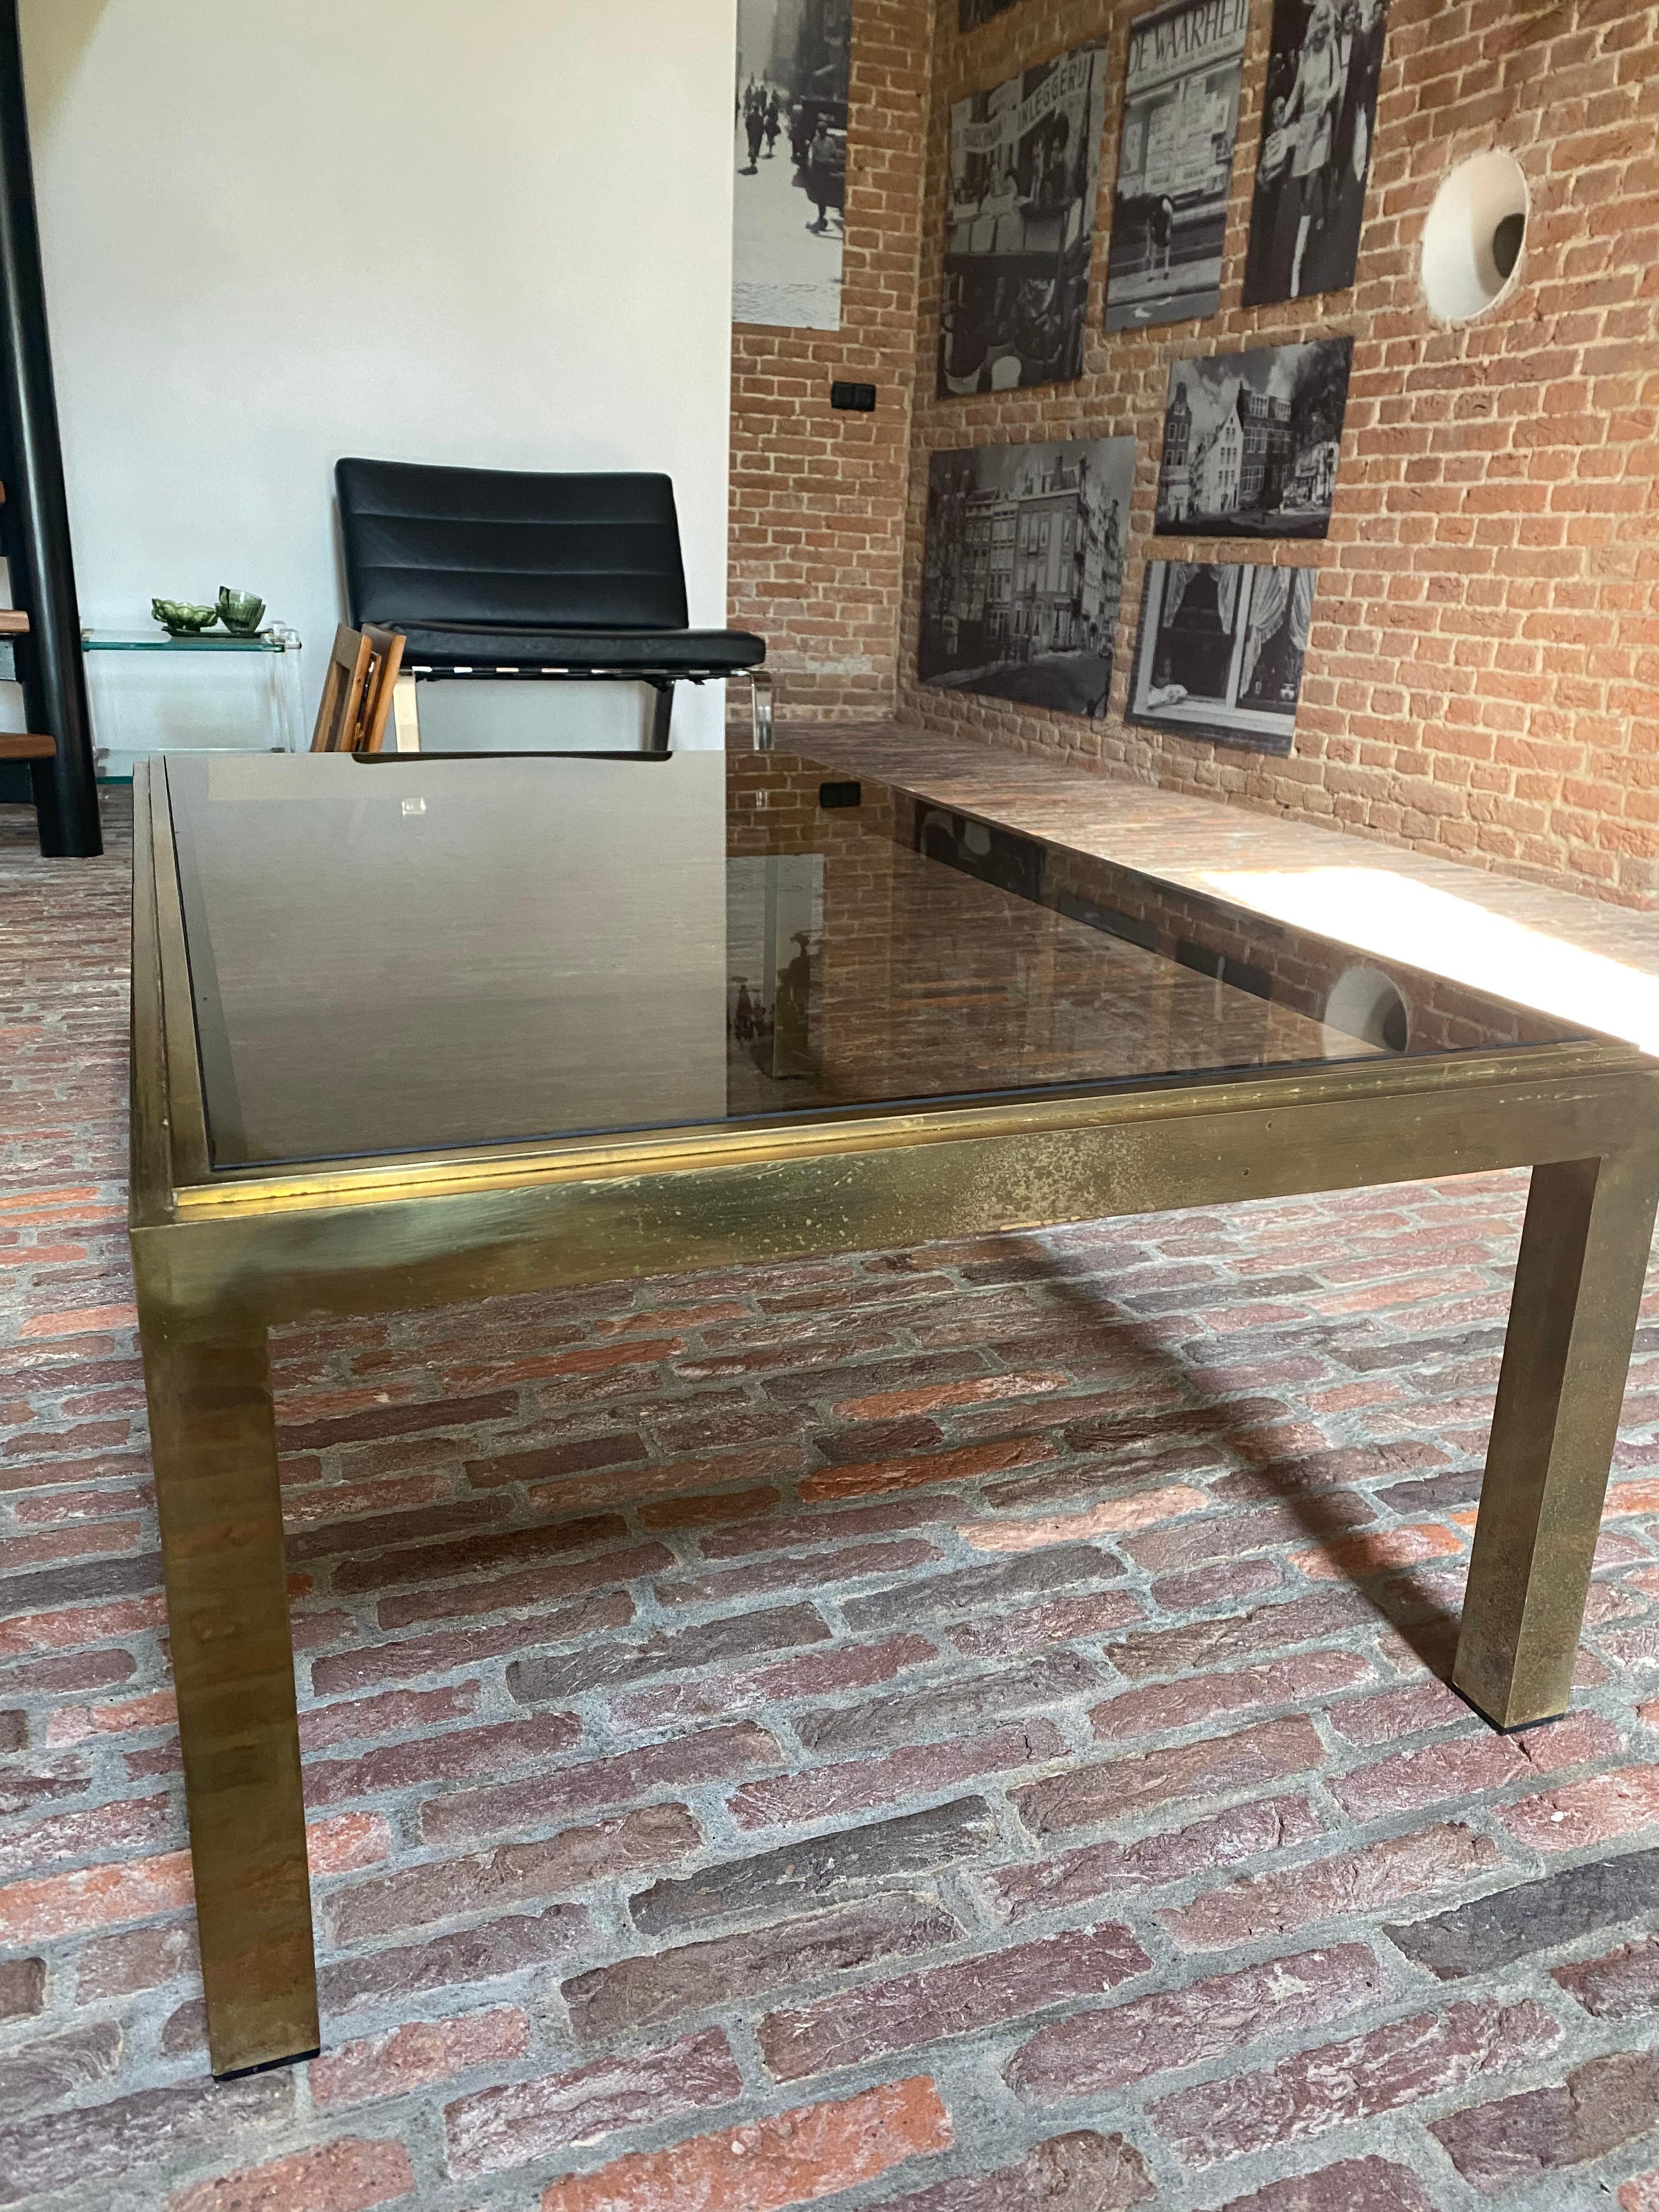 Elegant French Mid-Century Modern coffee table in solid brass with smoked glass top designed attributed to Willy Rizzo. The table is in used condition and has a beautiful patina (small scratches on the brass and glass)
Dimensions: 116 x 66 x 36 cm